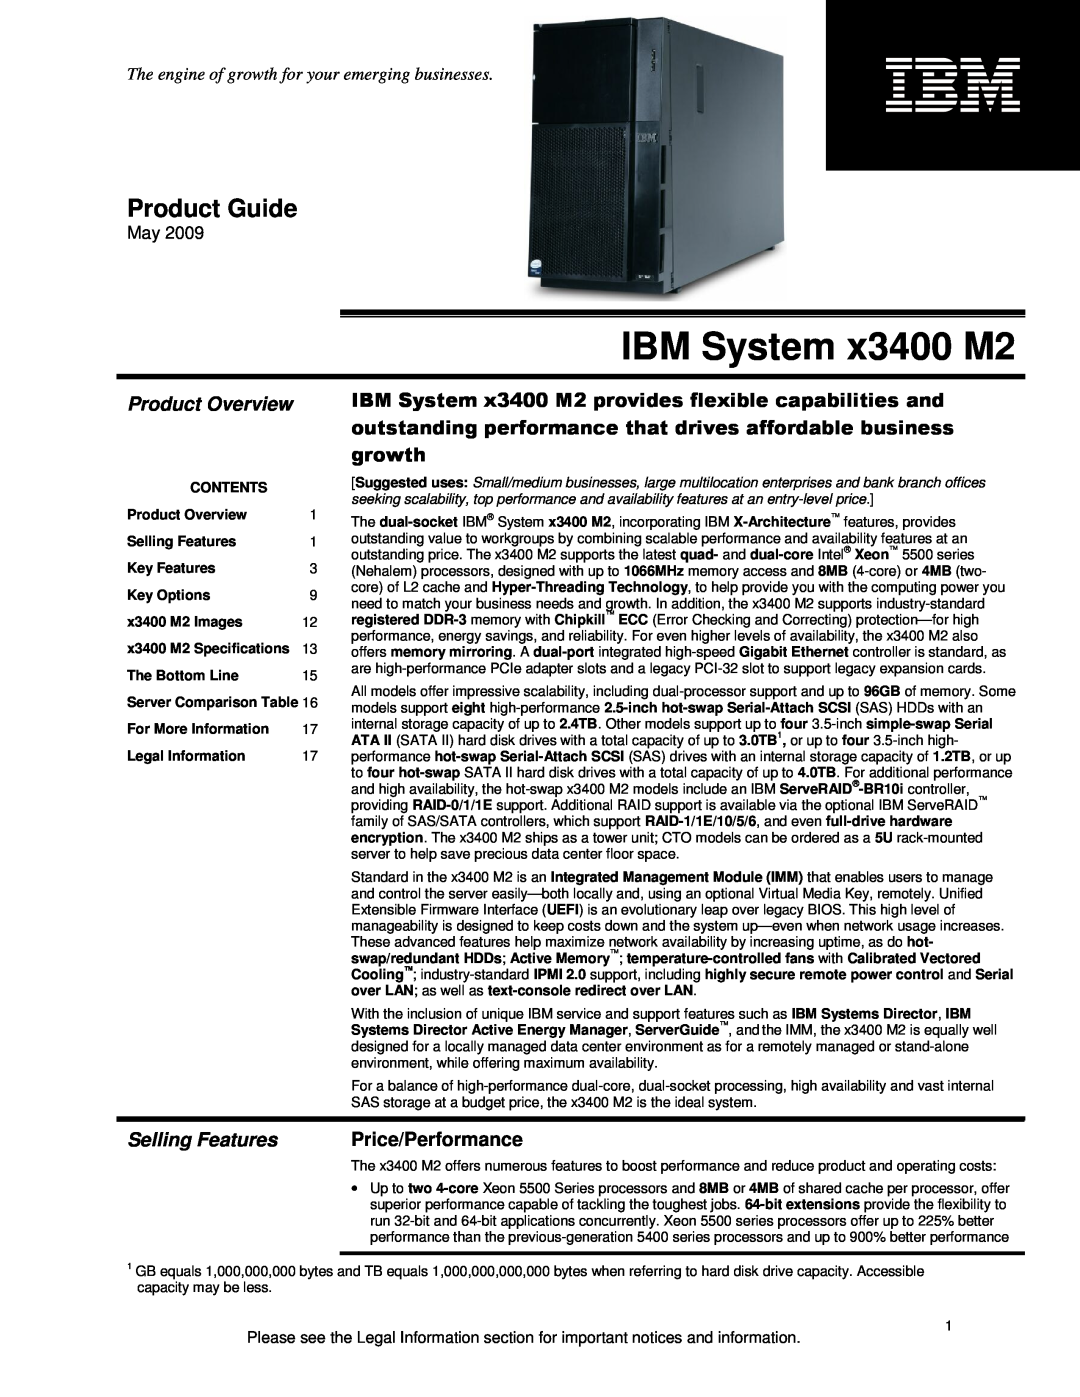 IBM X3400 M2 specifications Product Overview, Selling Features, Price/Performance, IBM System x3400 M2, Product Guide 